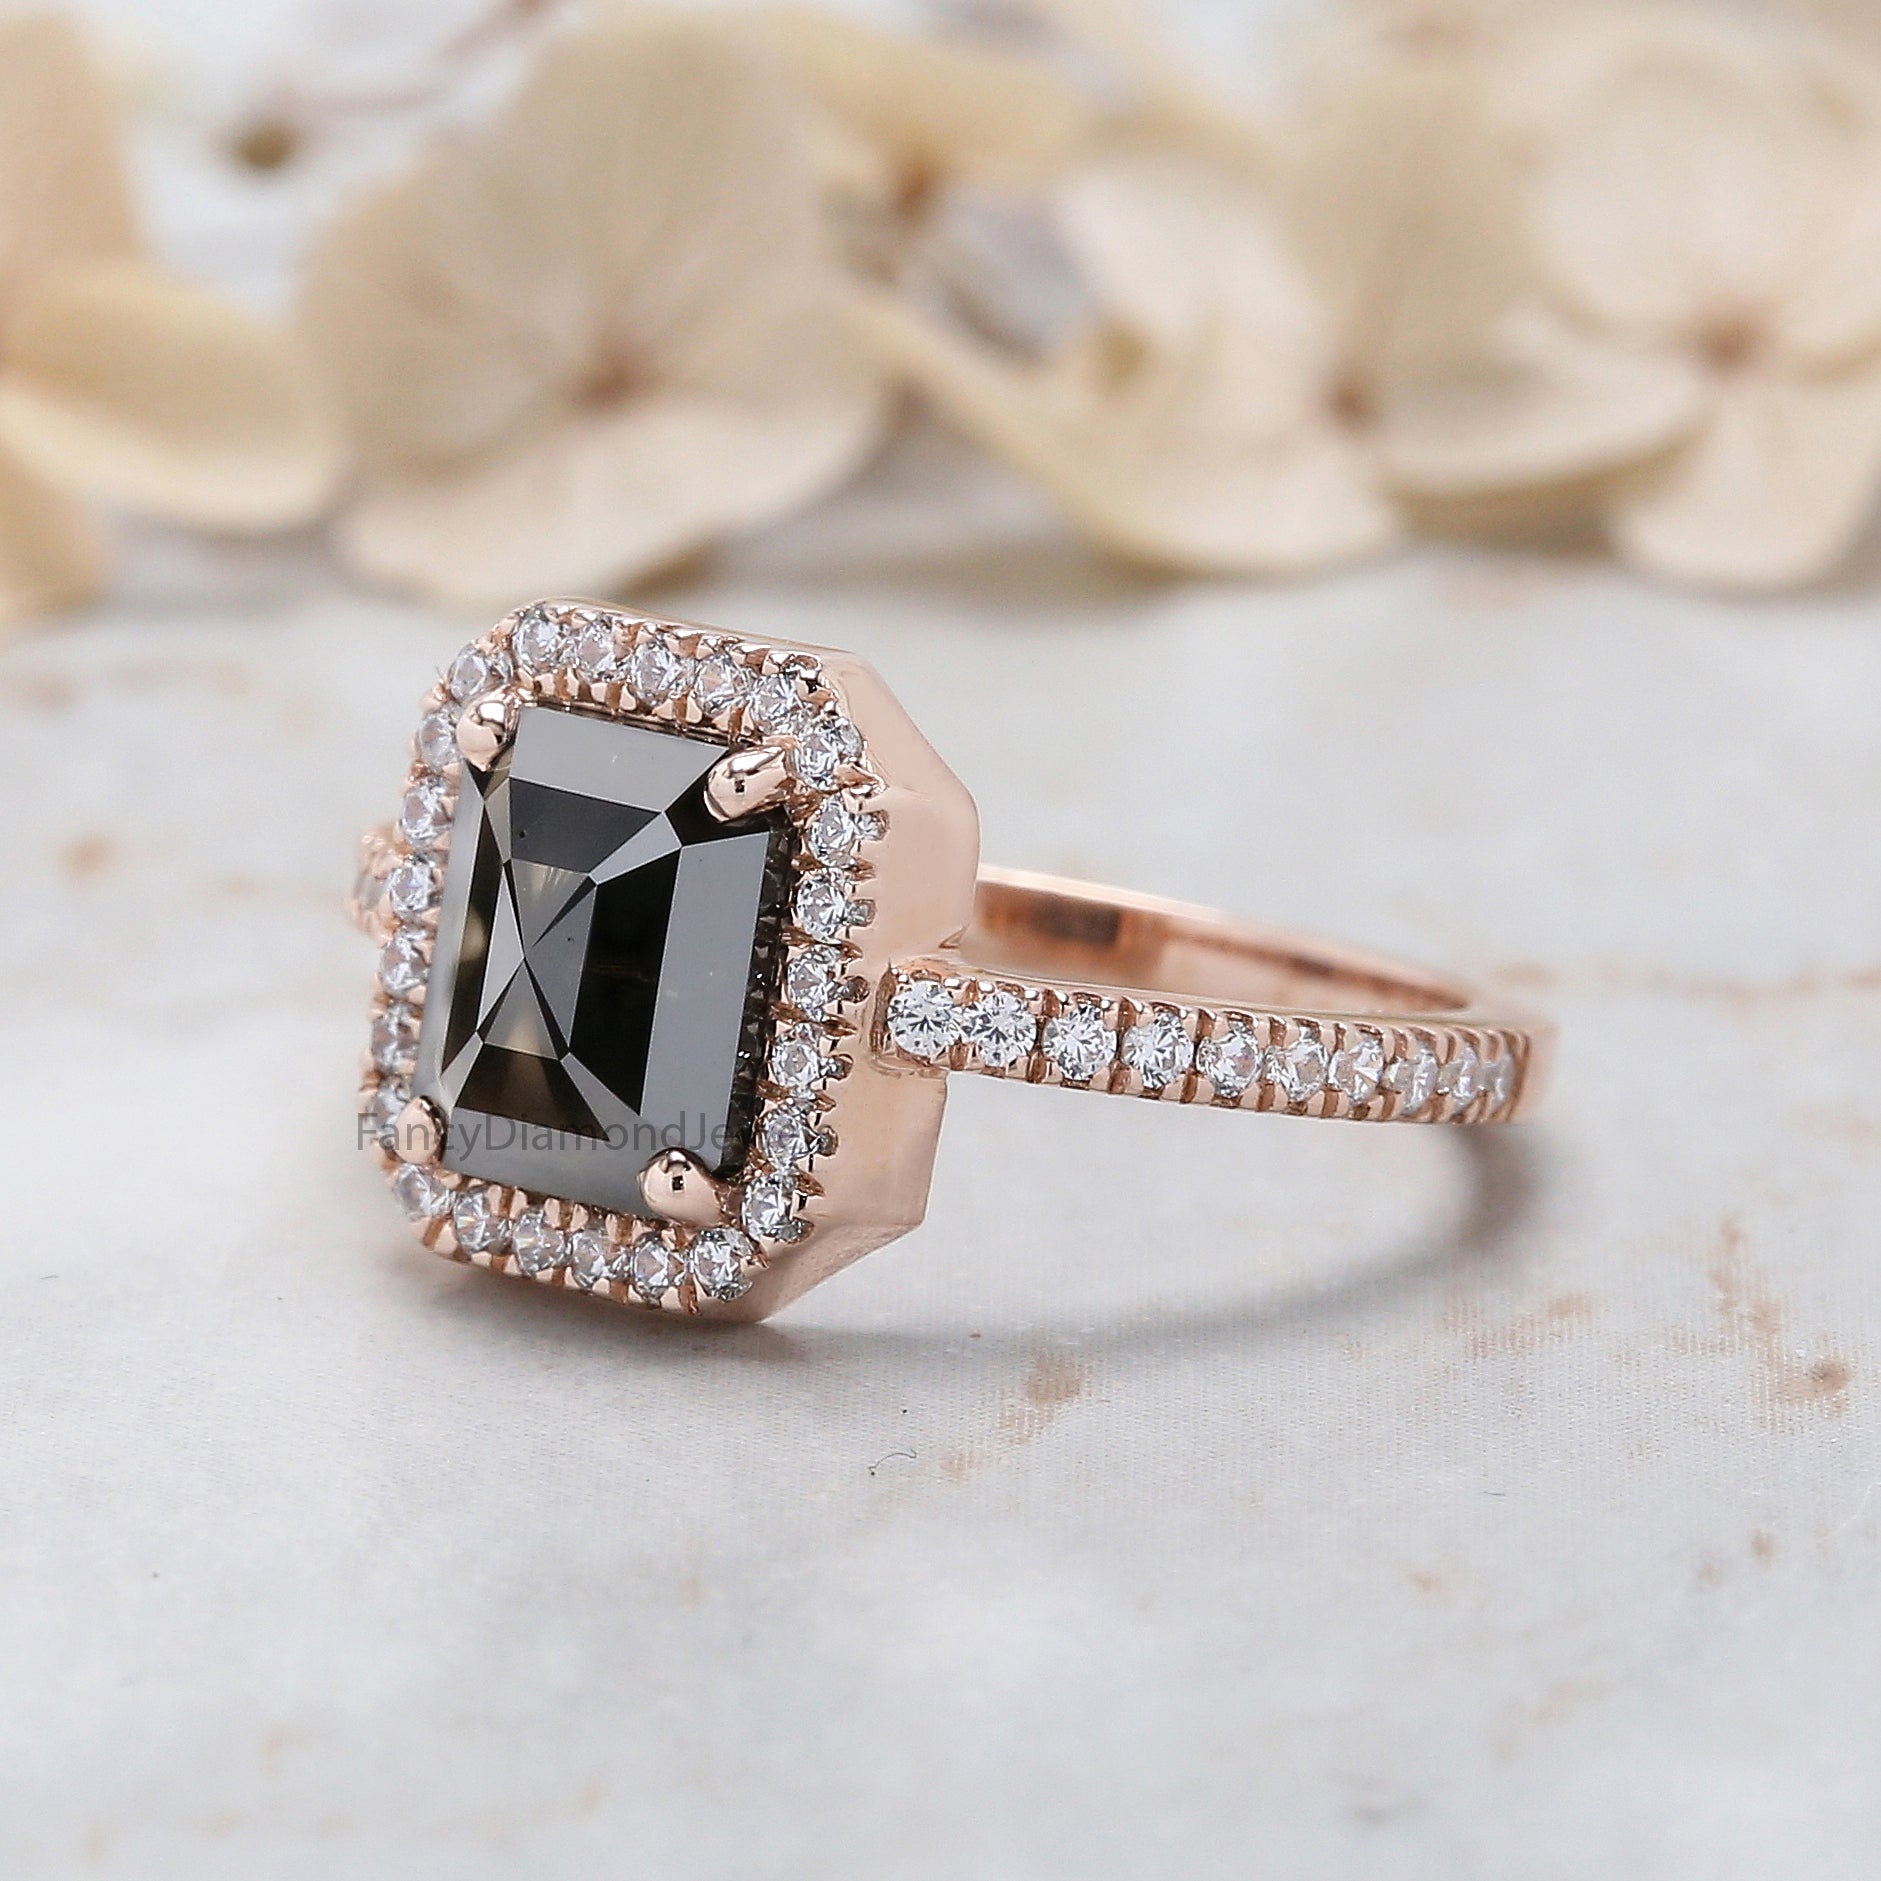 Emerald Cut Black Color Diamond Ring 1.63 Ct 7.80 MM Emerald Diamond Ring 14K Solid Rose Gold Silver Engagement Ring Gift For Her QL8372